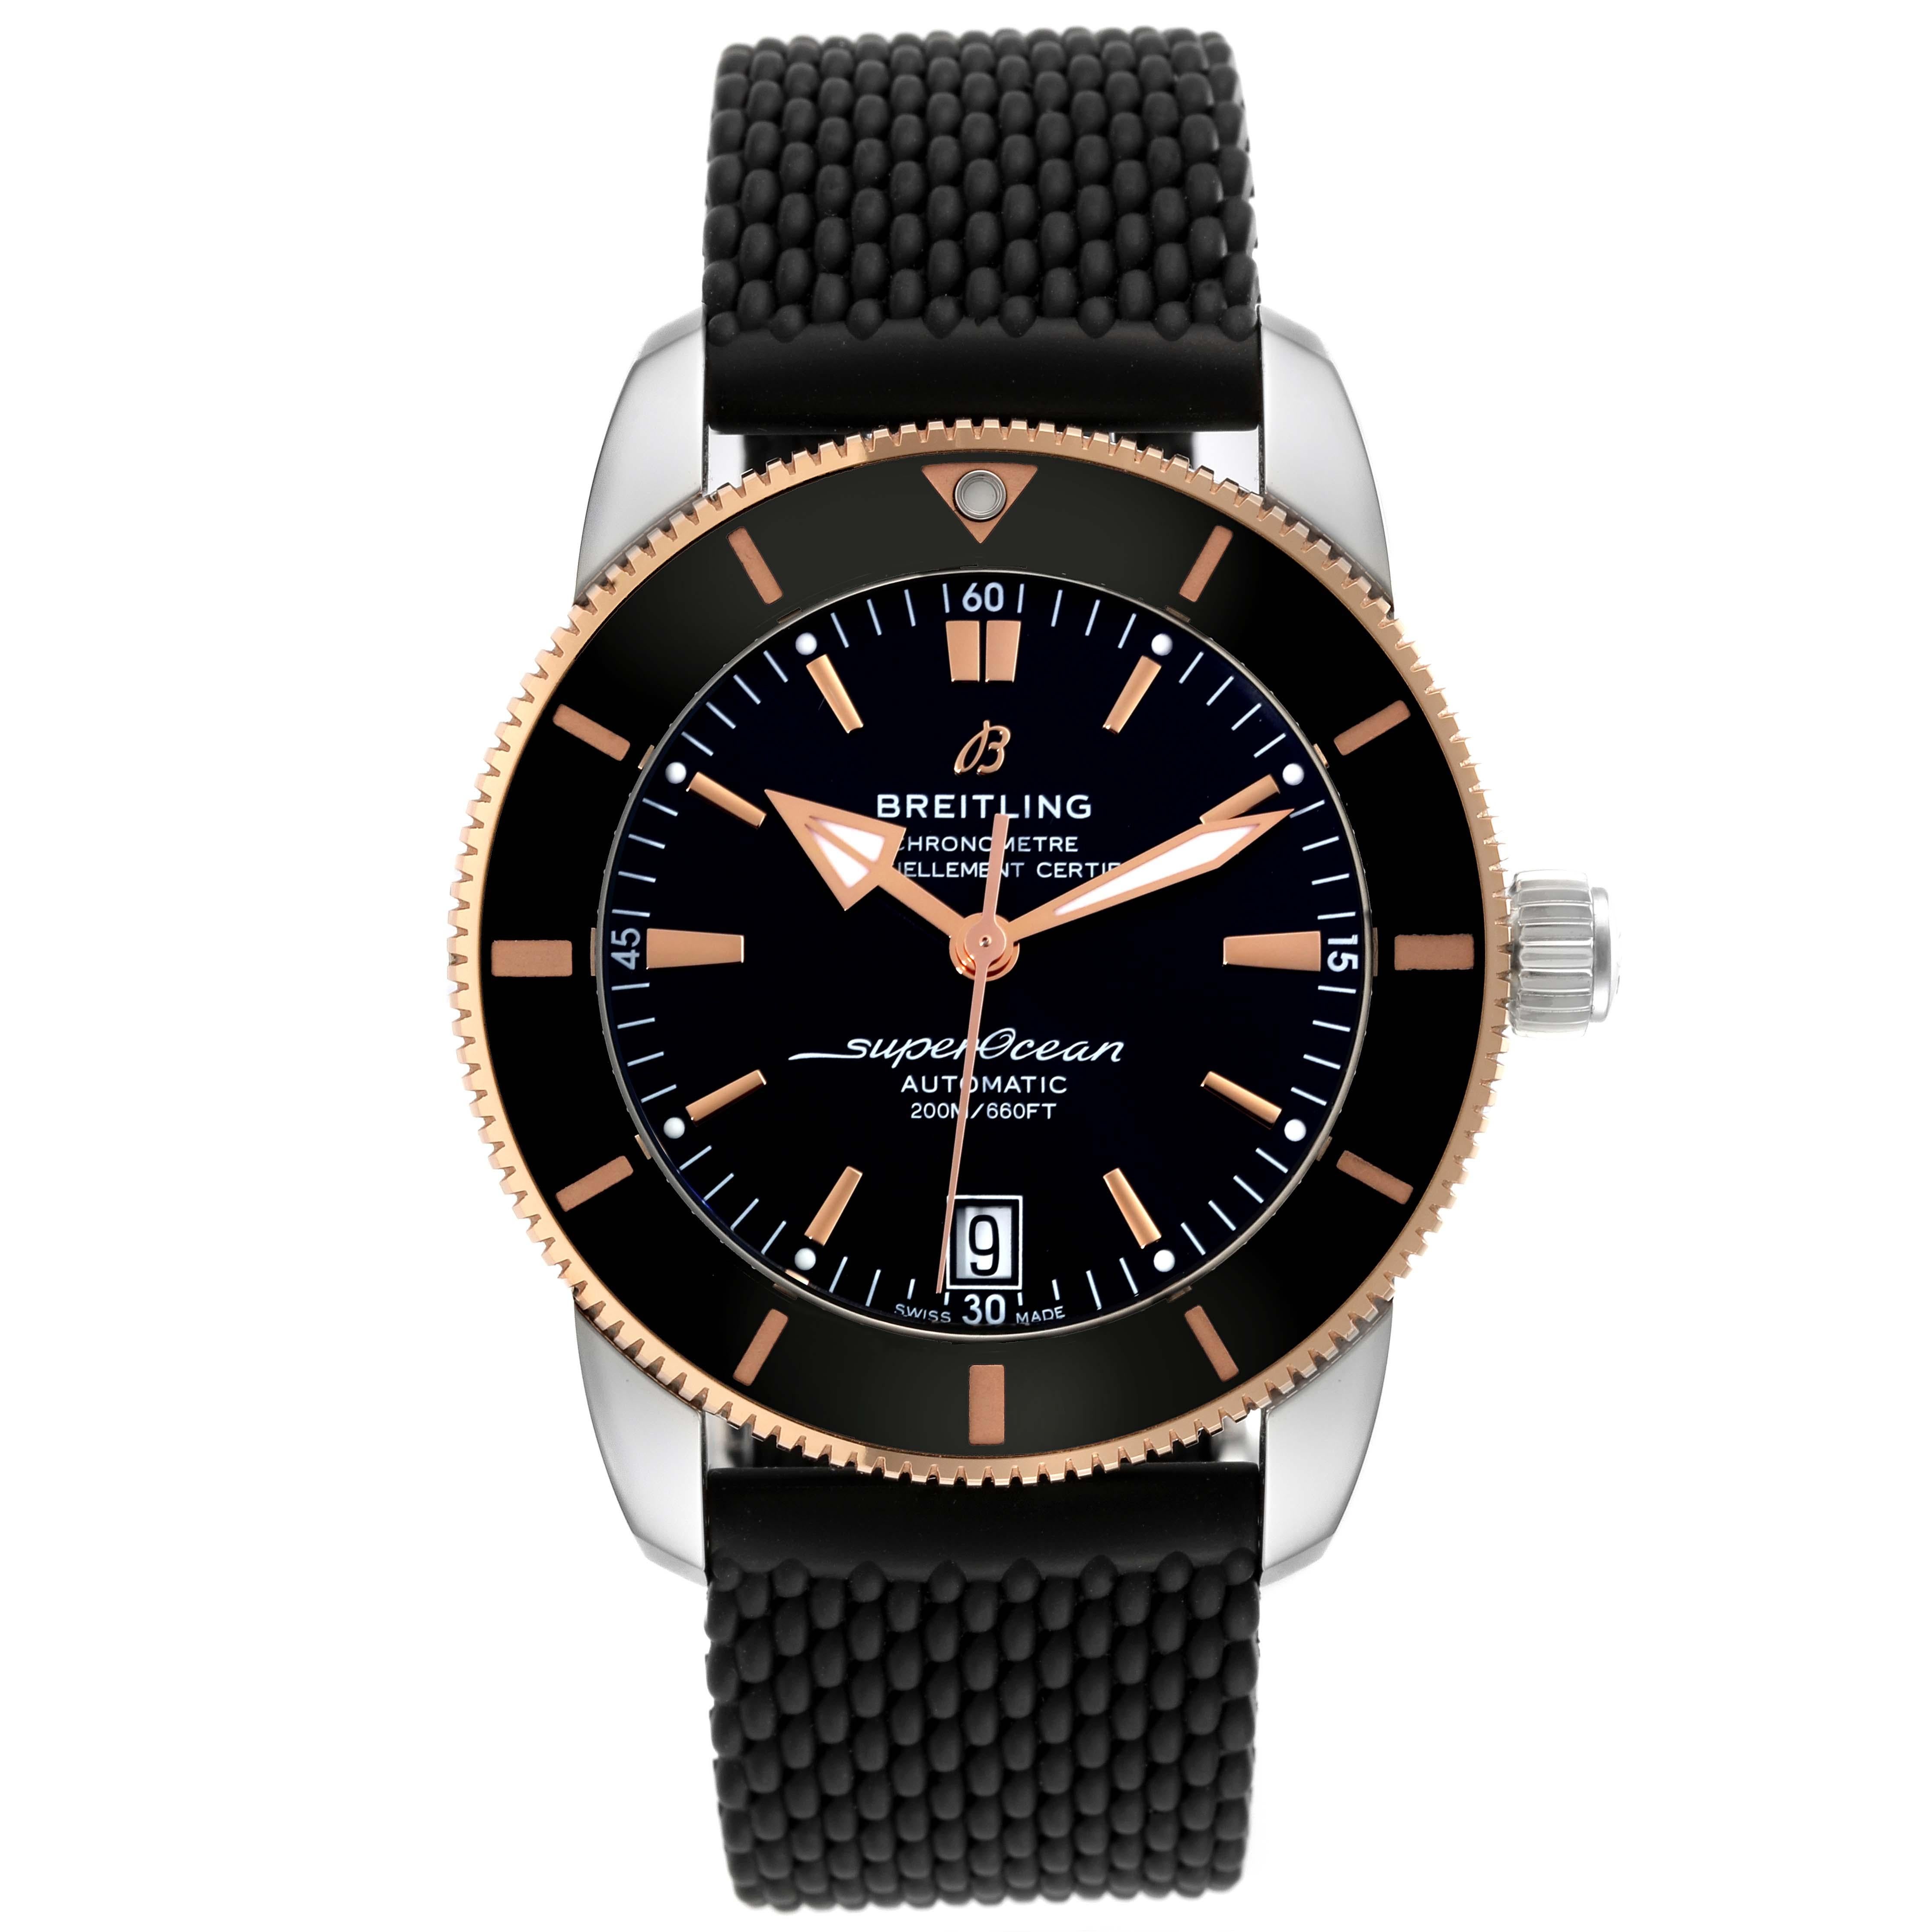 Breitling Superocean Heritage II 42 Steel Rose Gold Mens Watch UB2010 Card. Automatic self-winding B20 movement. Stainless steel case 42.0 mm in diameter. Stainless steel screwed-down crown. Solid 18k rose gold bezel with black ceramic bezel insert.